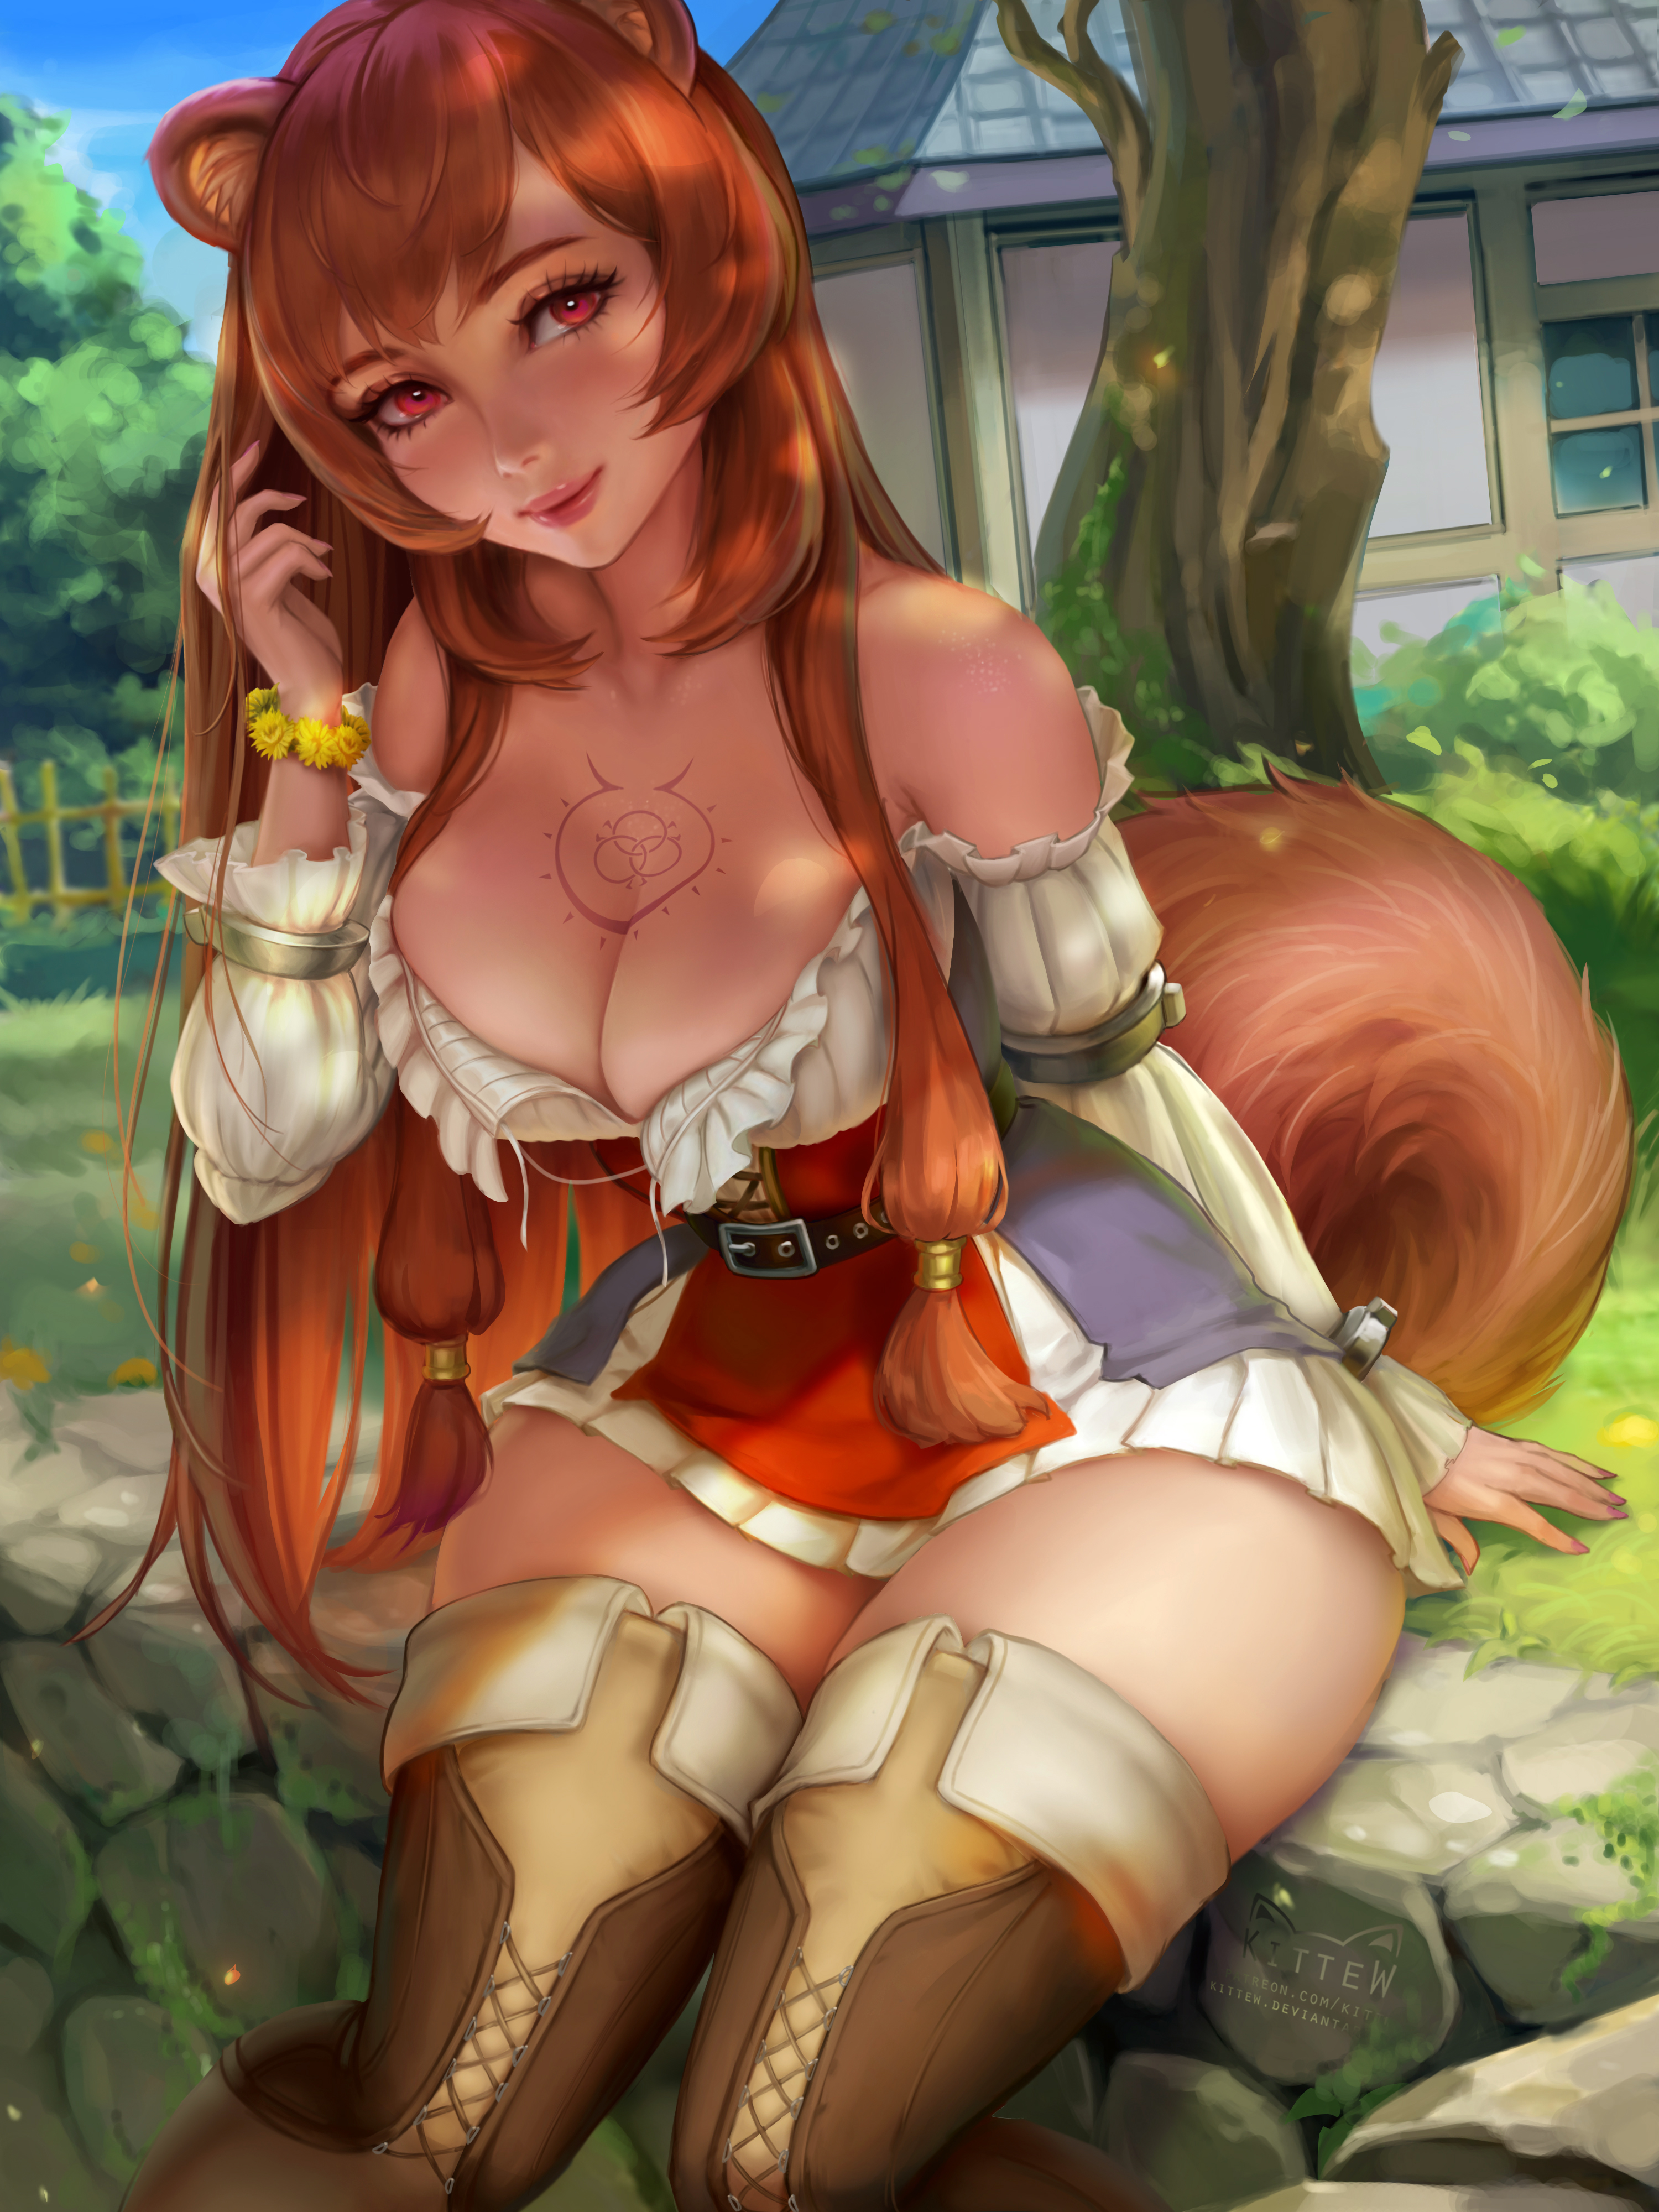 Anime 3000x4000 Raphtalia Tate no Yuusha no Nariagari anime anime girls fantasy girl animal ears long hair looking at viewer smiling tail tattoo bare shoulders cleavage dress wide hips thick thigh curvy thigh high boots sitting portrait display artwork drawing digital art illustration fan art Kittew